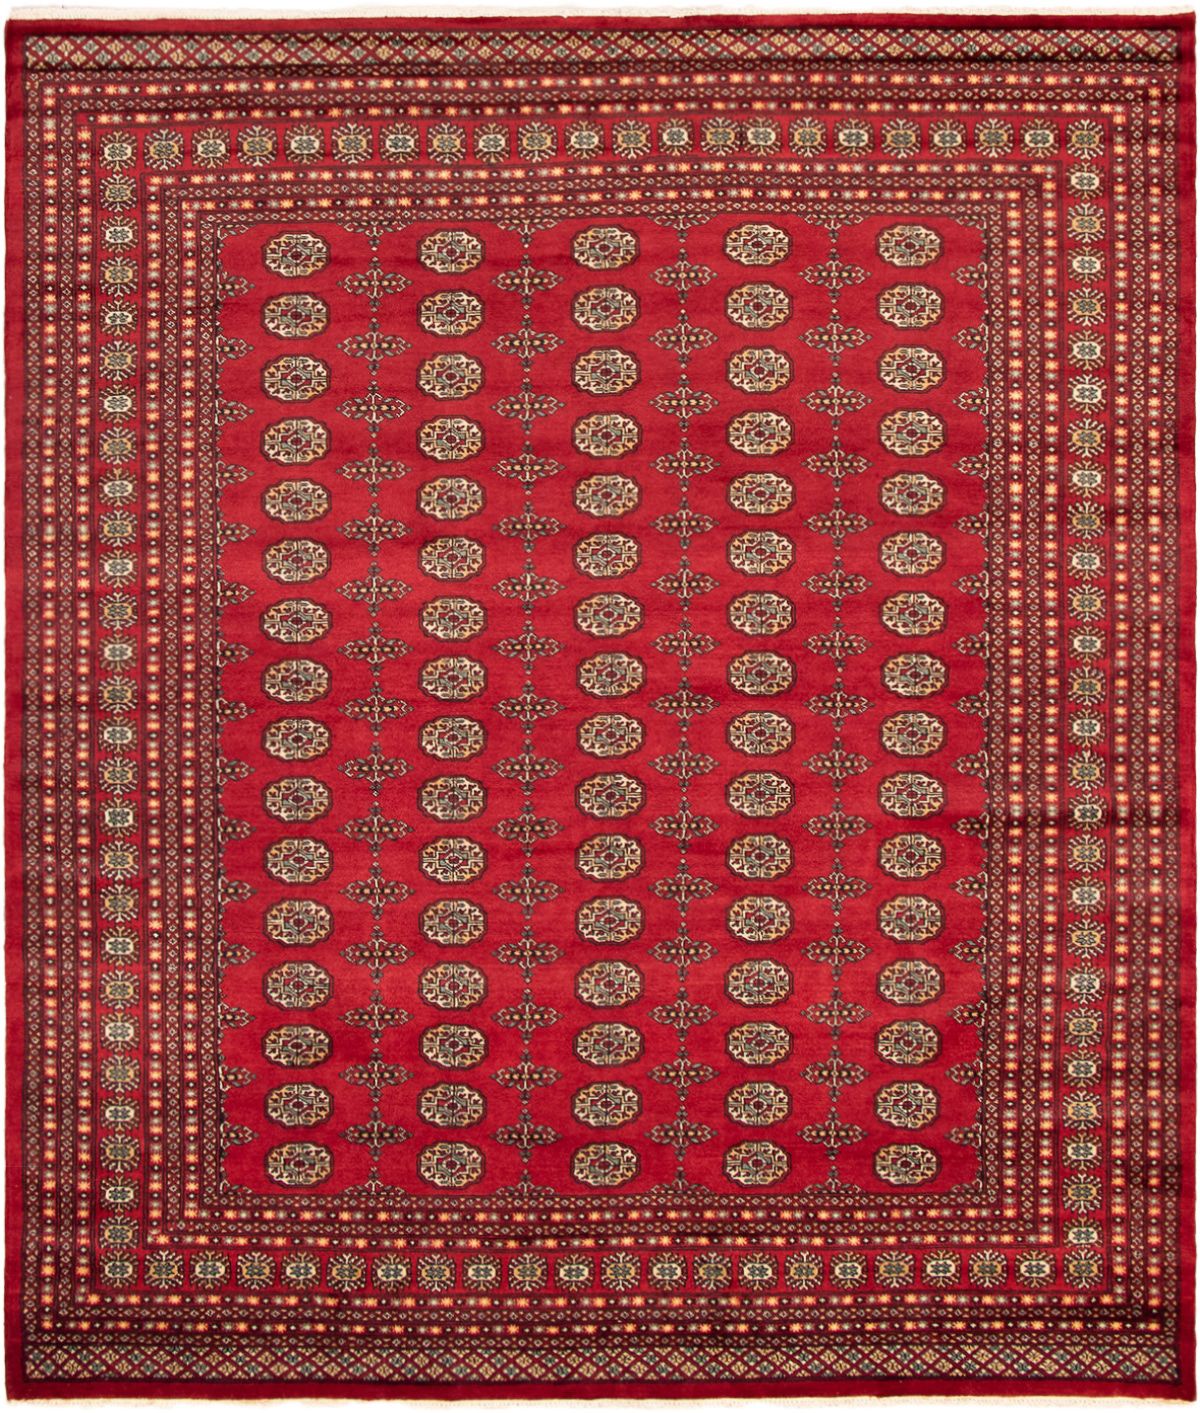 Hand-knotted Finest Peshawar Bokhara Red Wool Rug 8'0" x 9'9"  Size: 8'0" x 9'9"  